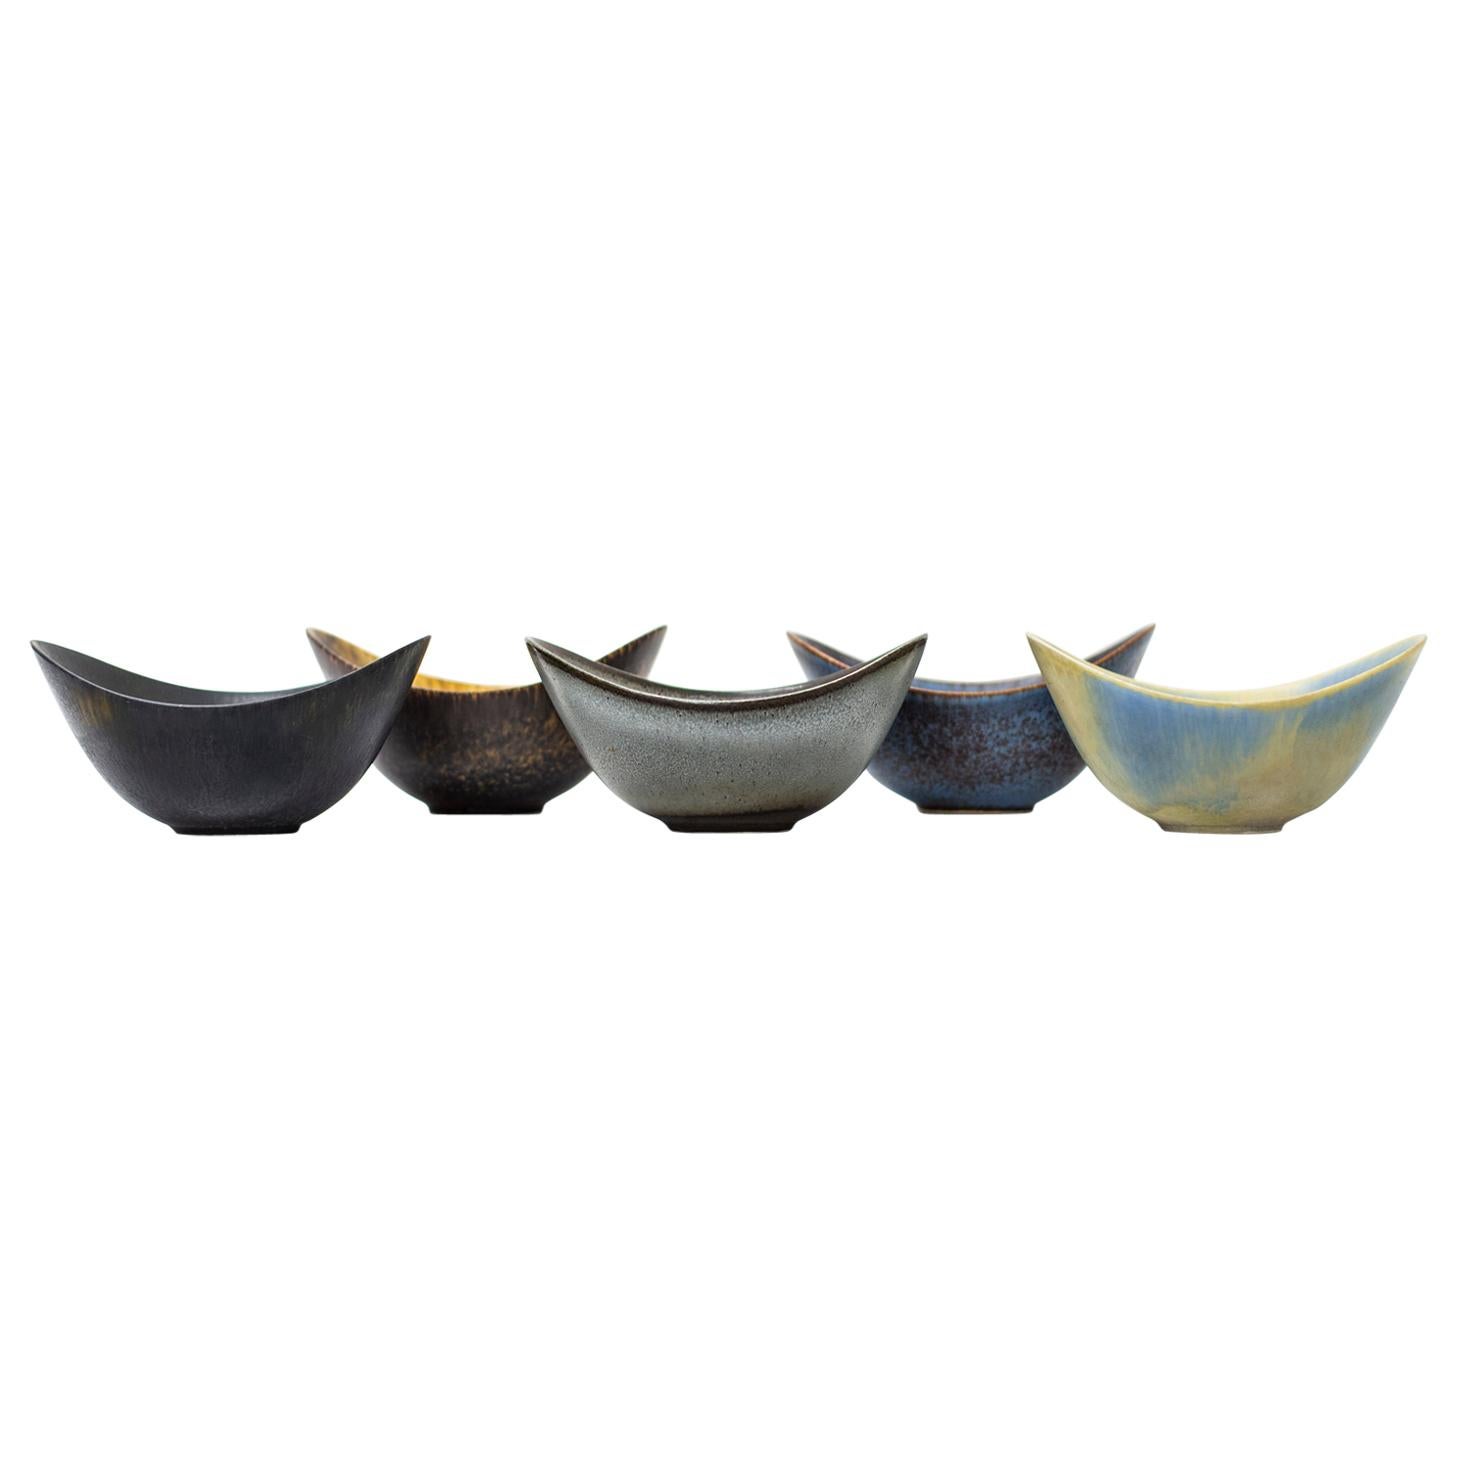 Set of Five Stoneware Bowls by Gunnar Nylund for Rörstrand, Sweden, 1950s